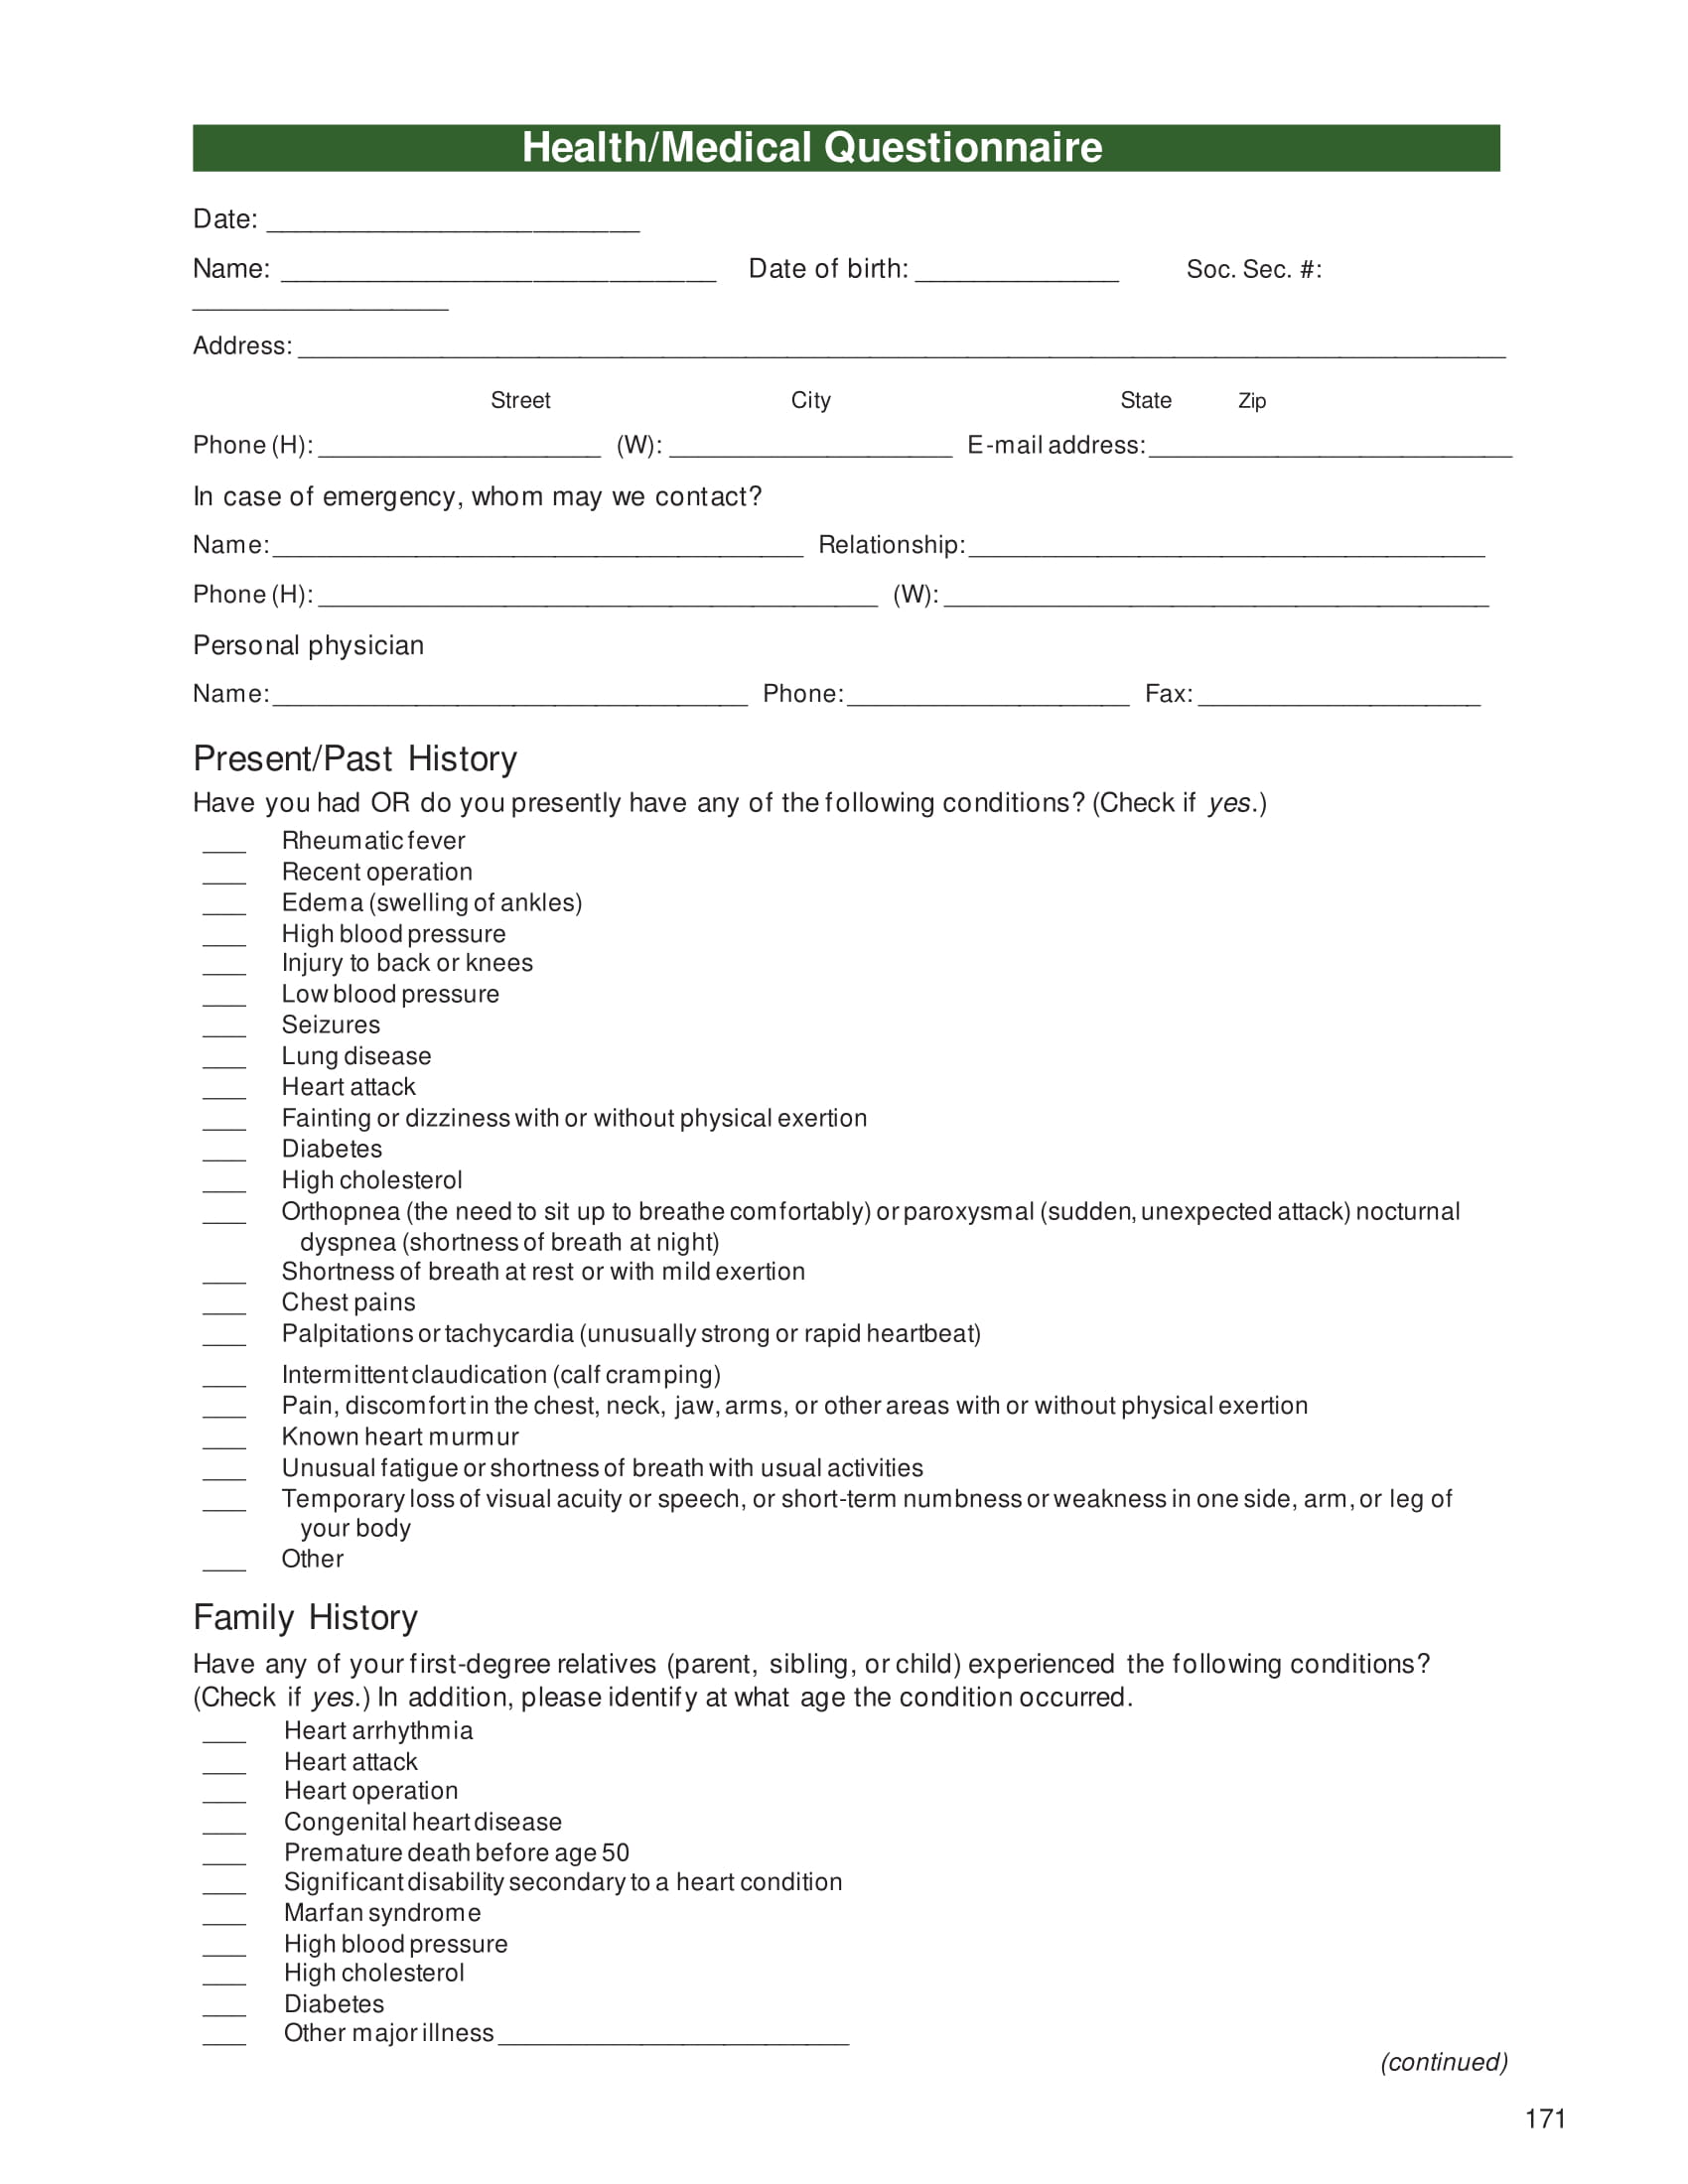 Healthy and Medical Questionnaire pdf.